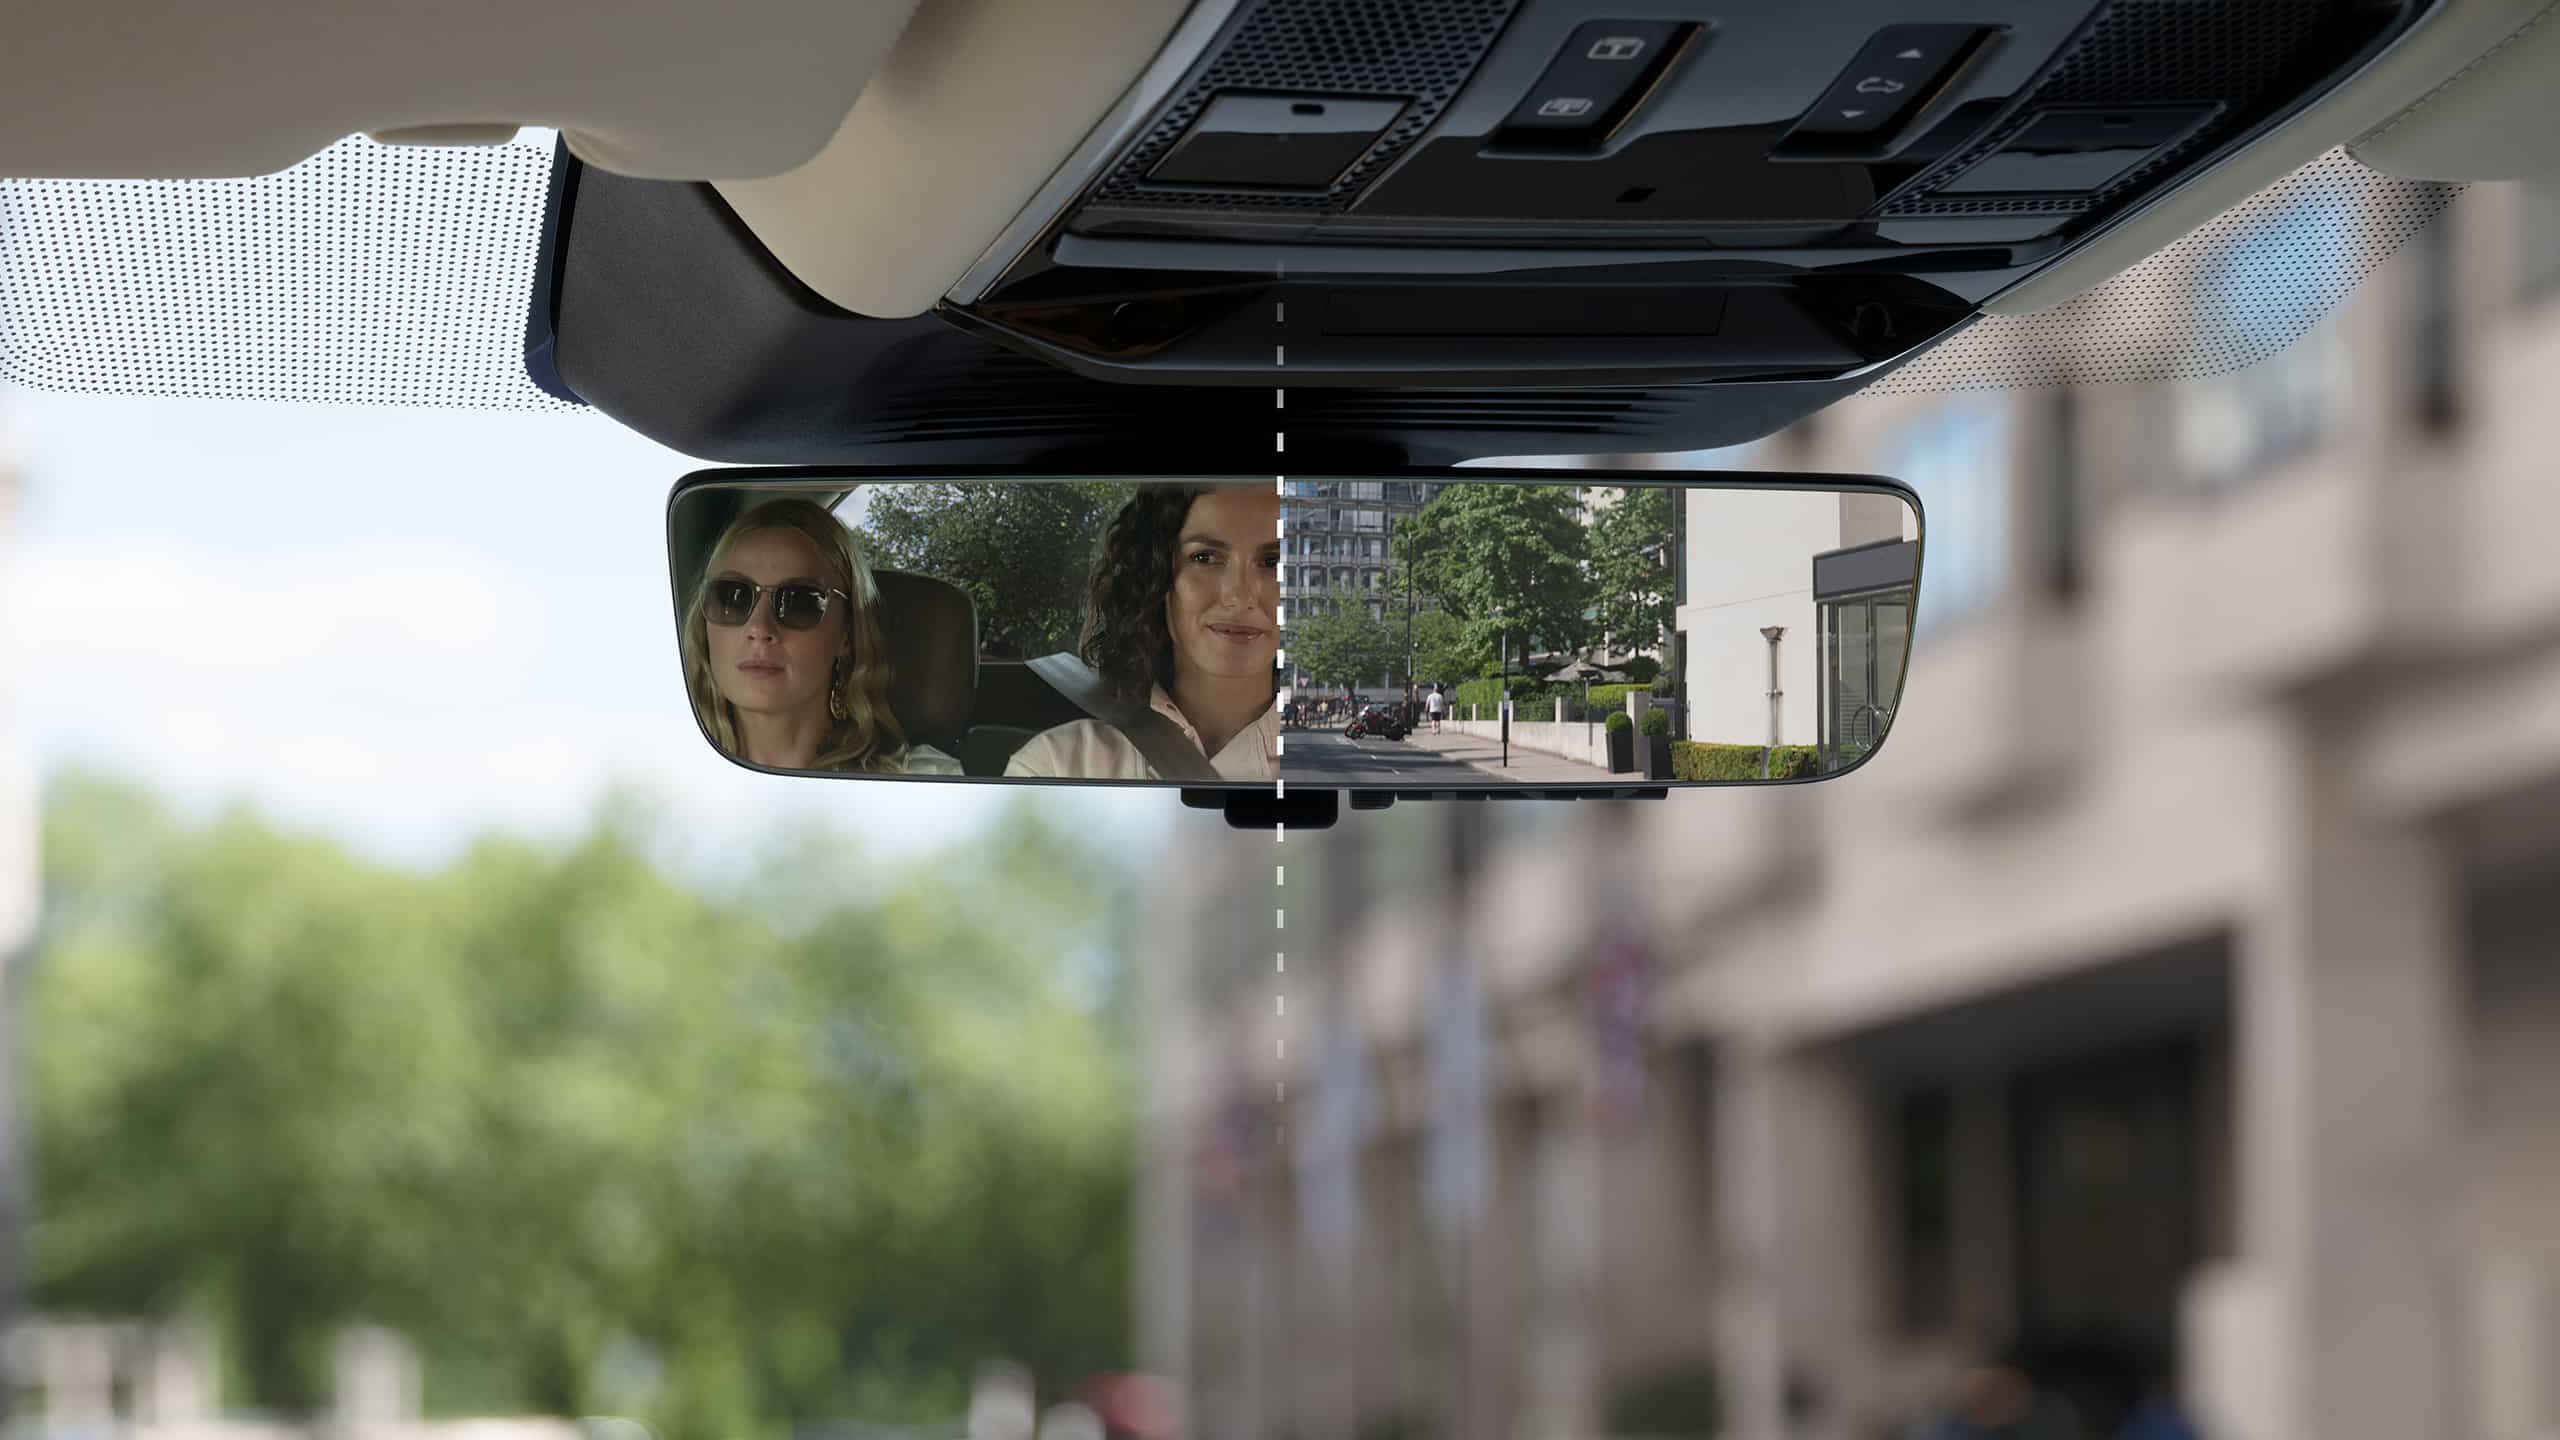 Range Rover High-Definition Streaming Media Rearview Mirror